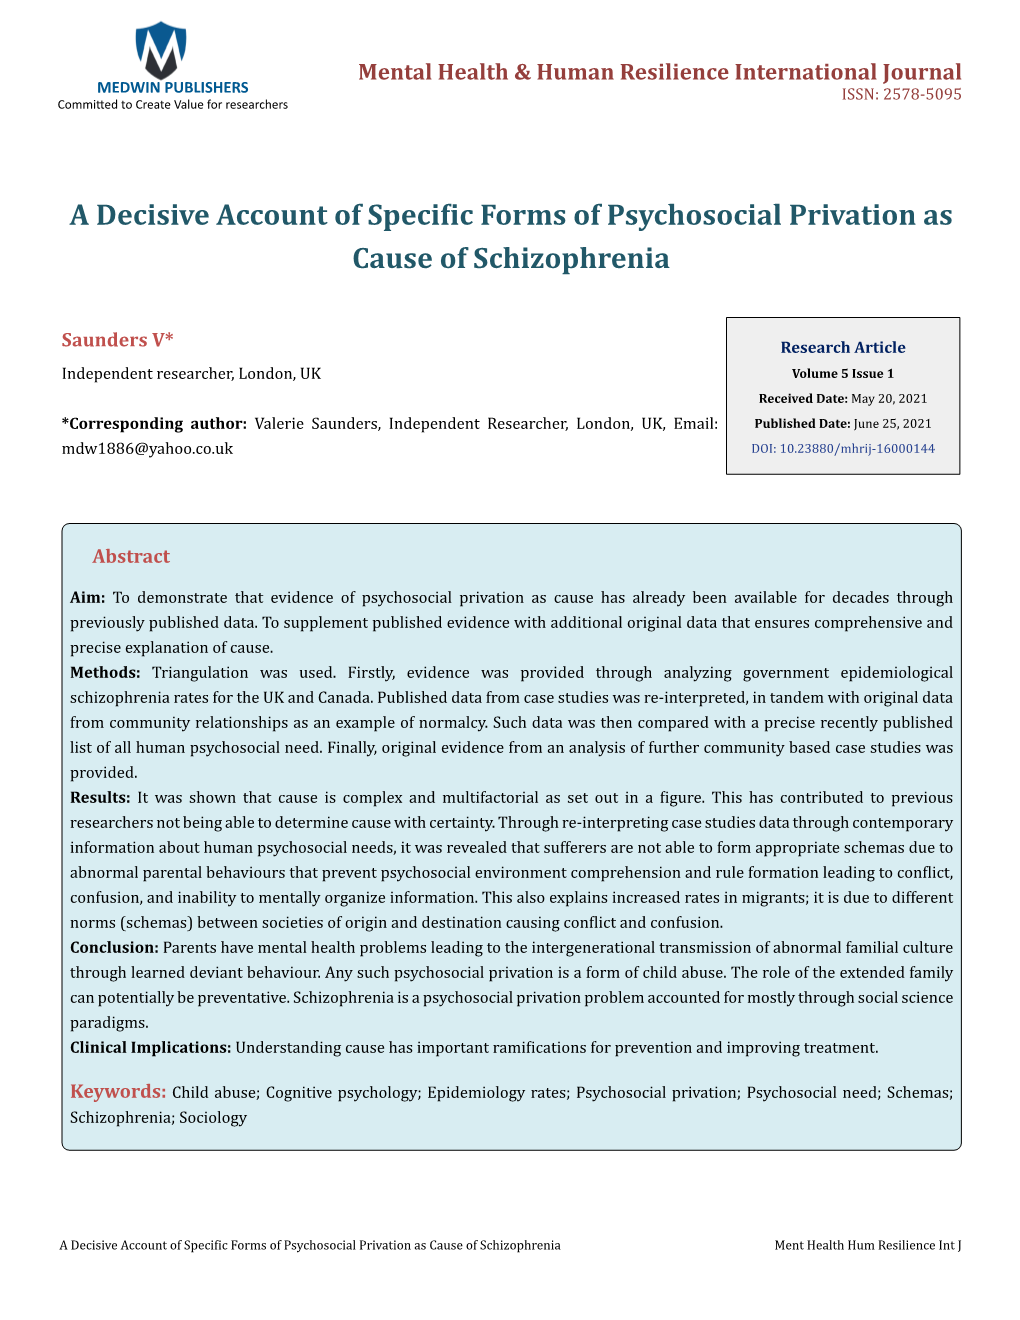 A Decisive Account of Specific Forms of Psychosocial Privation As Cause of Schizophrenia